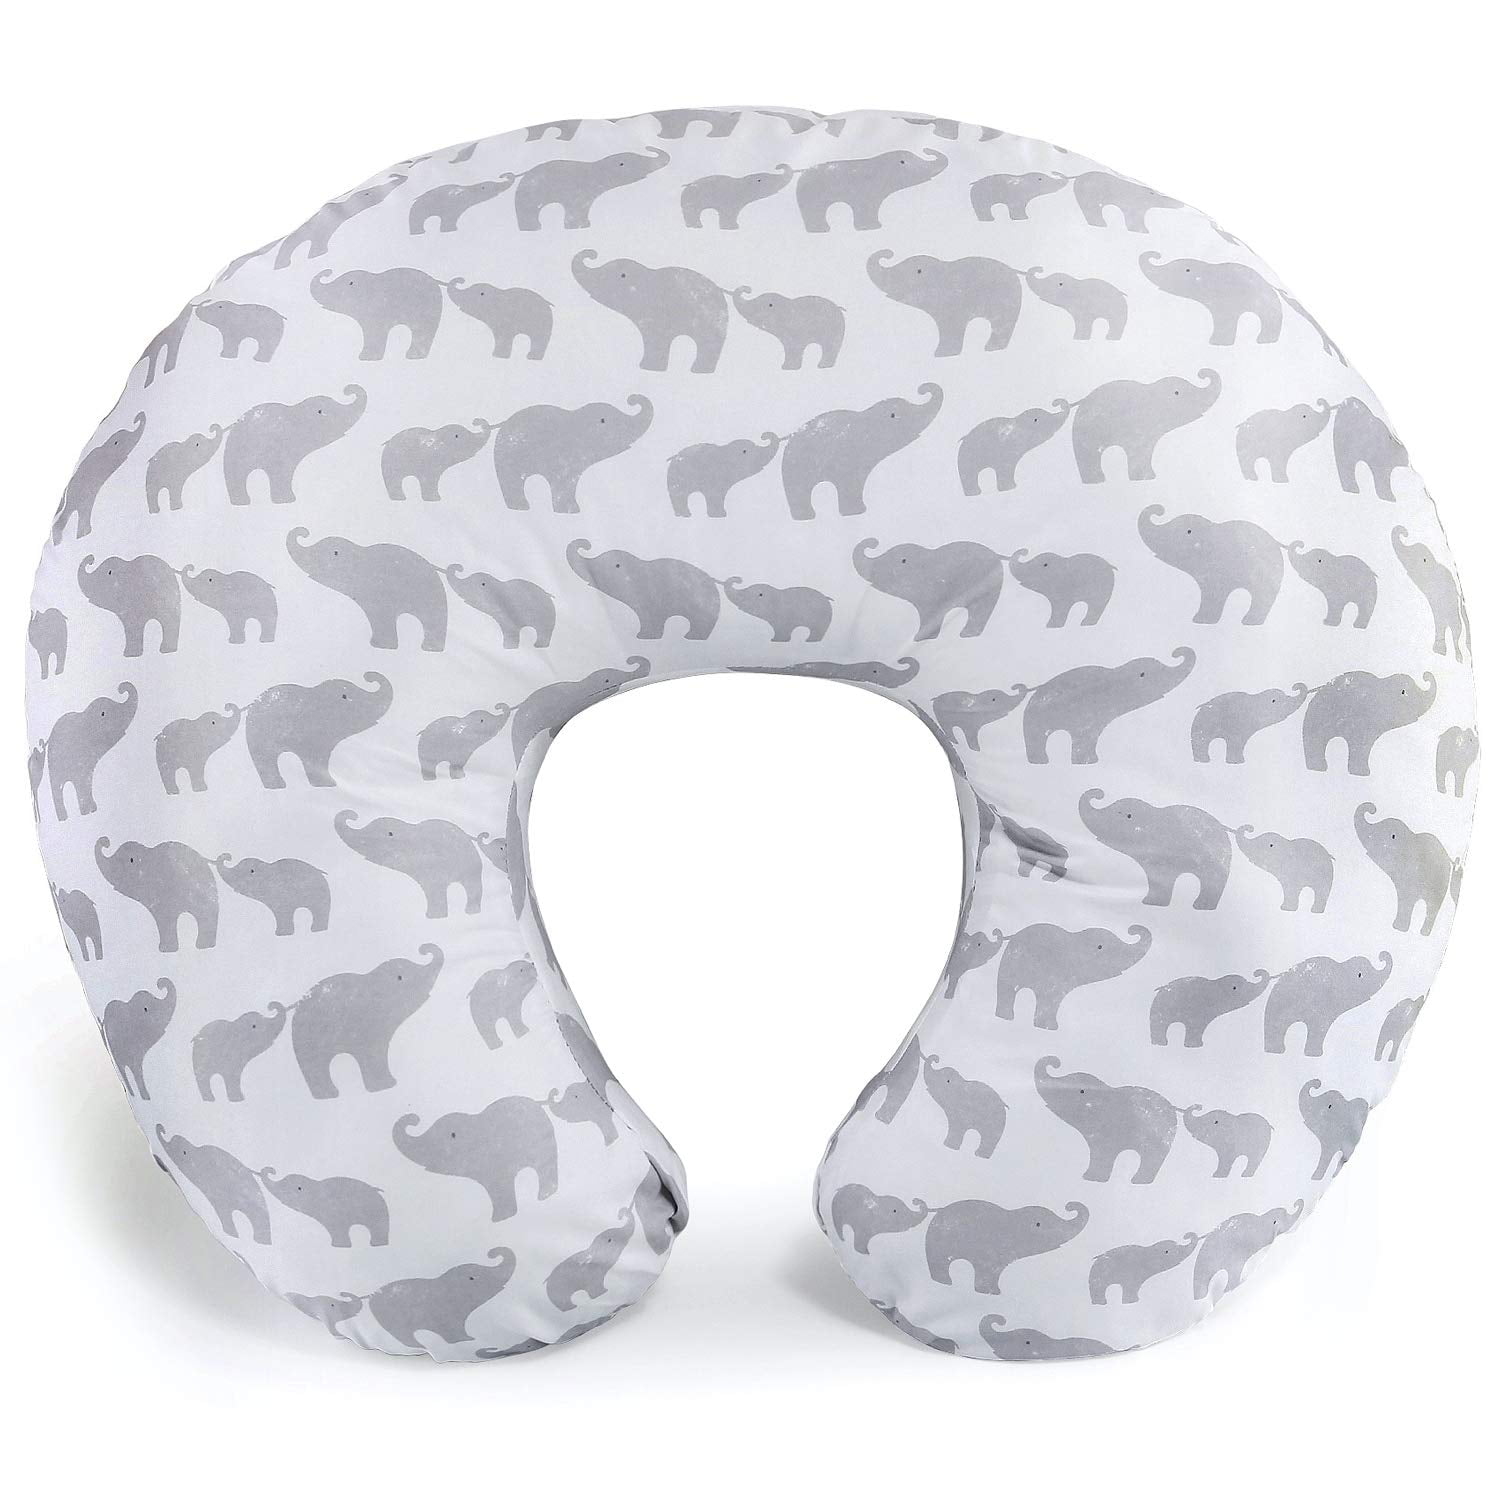 Blue Elephant Cover for The Peanut Shell Extra-Large Nursing Pillow